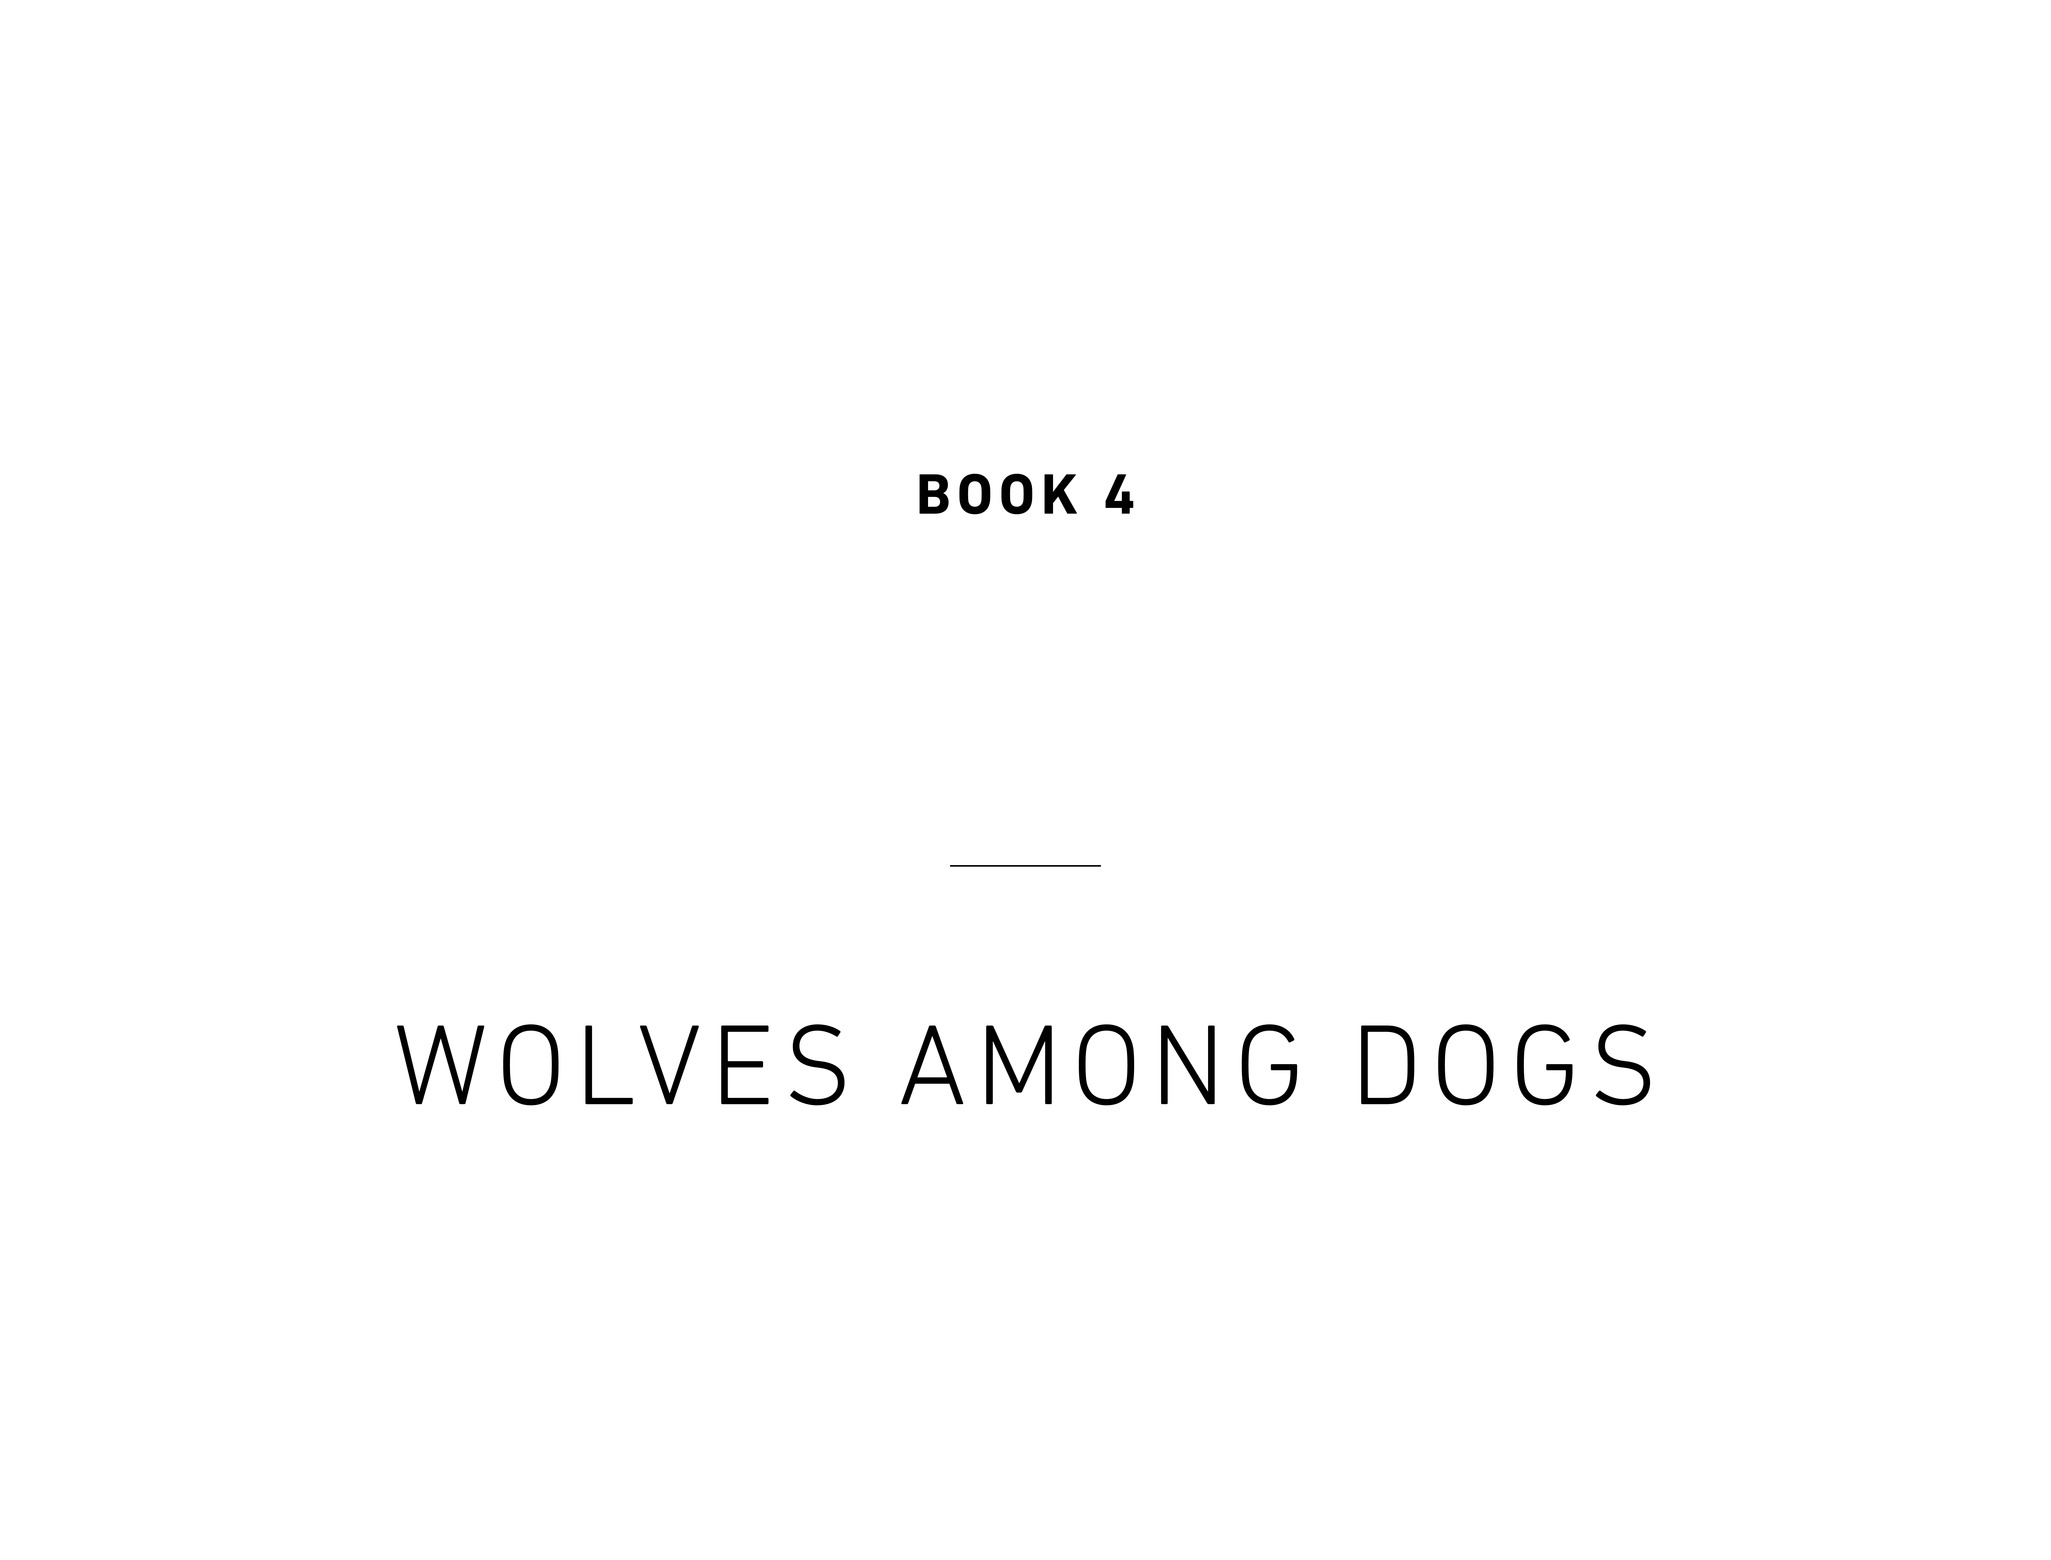 Book 4 Wolves Among Dogs